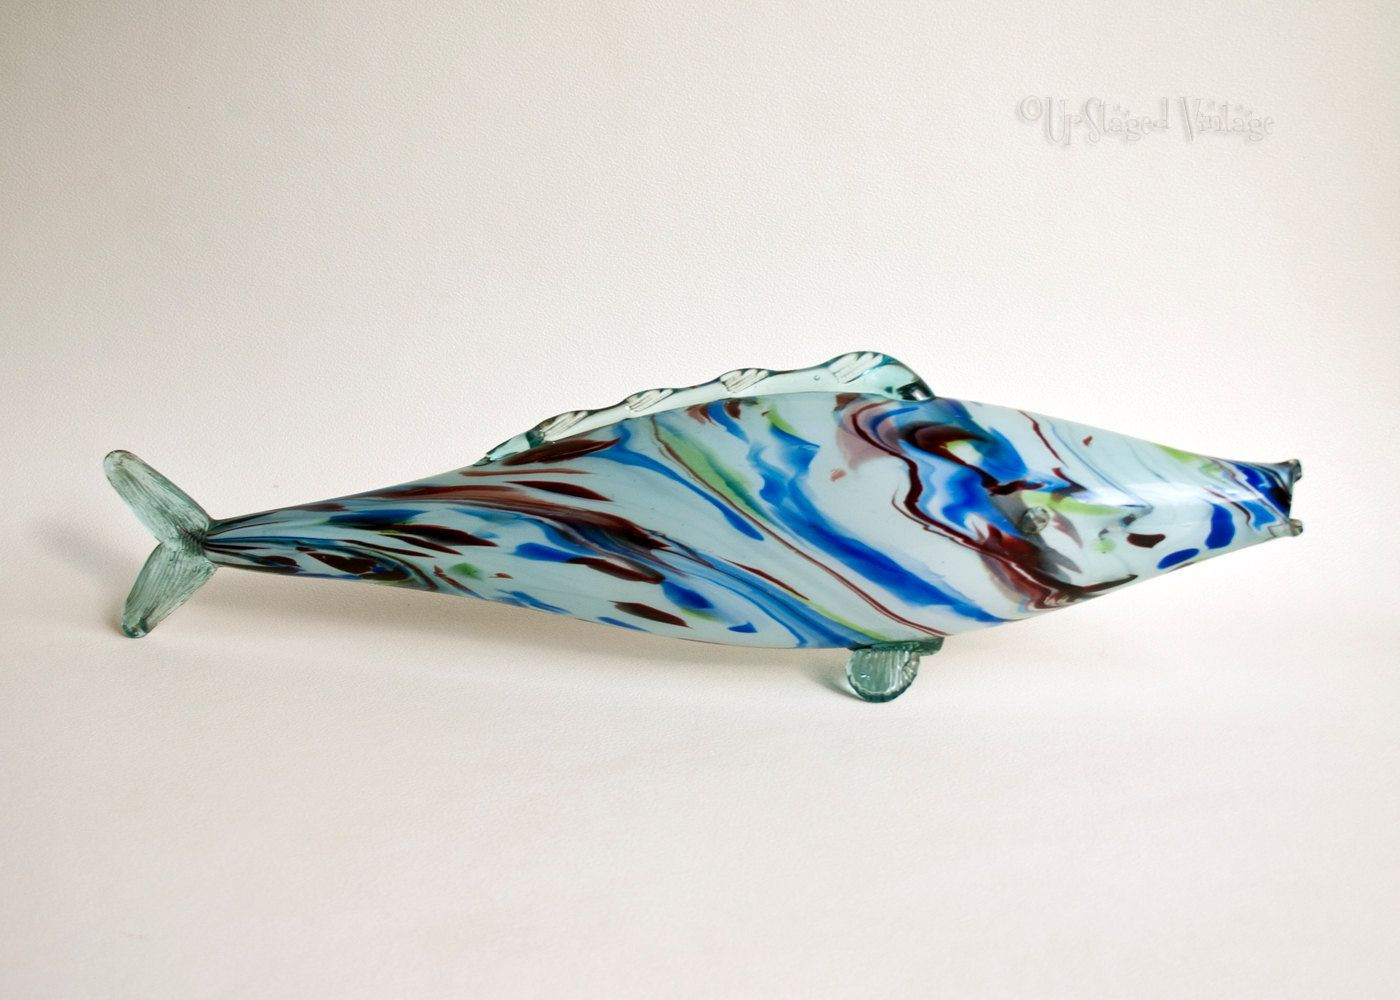 25 Best Large Glass Fish Vase 2024 free download large glass fish vase of vintage retro 1960s 70s fish large blue murano style art glass from intended for vintage retro 1960s 70s fish large blue murano style art glass from upstagedvintage 